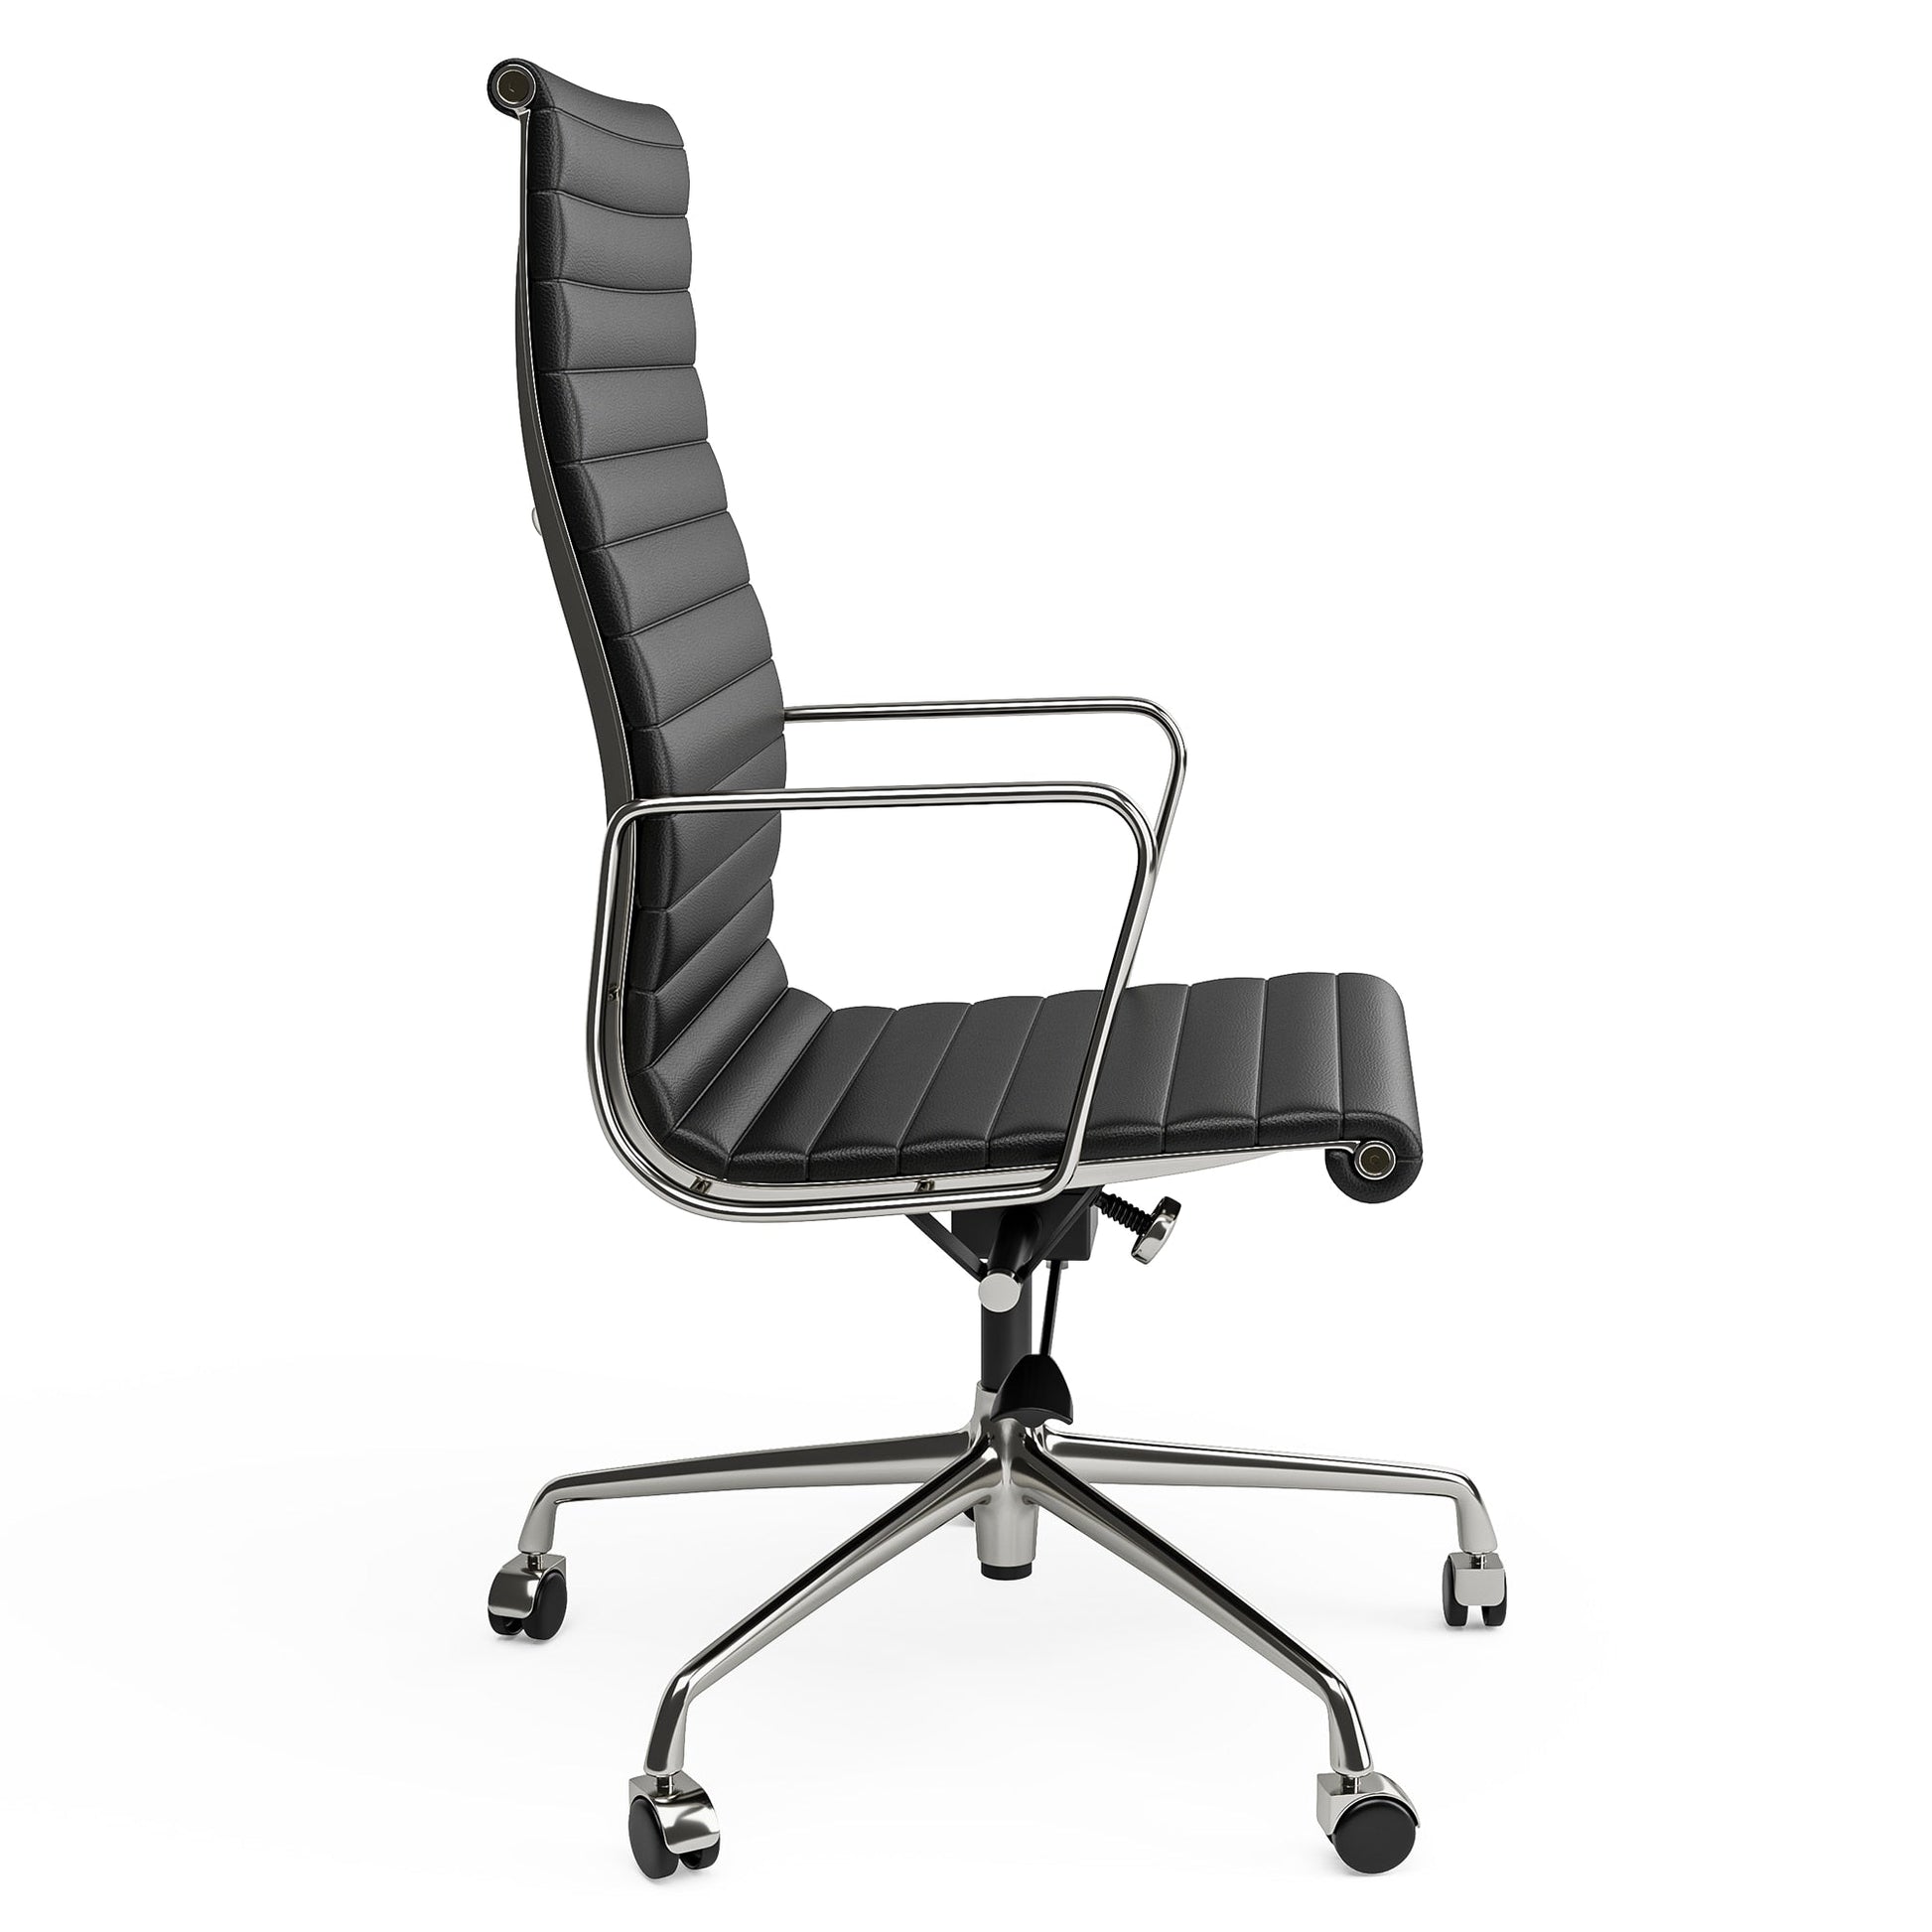 CORX Designs - Eames Aluminum Group Office Chair with Genuine Leather - Review